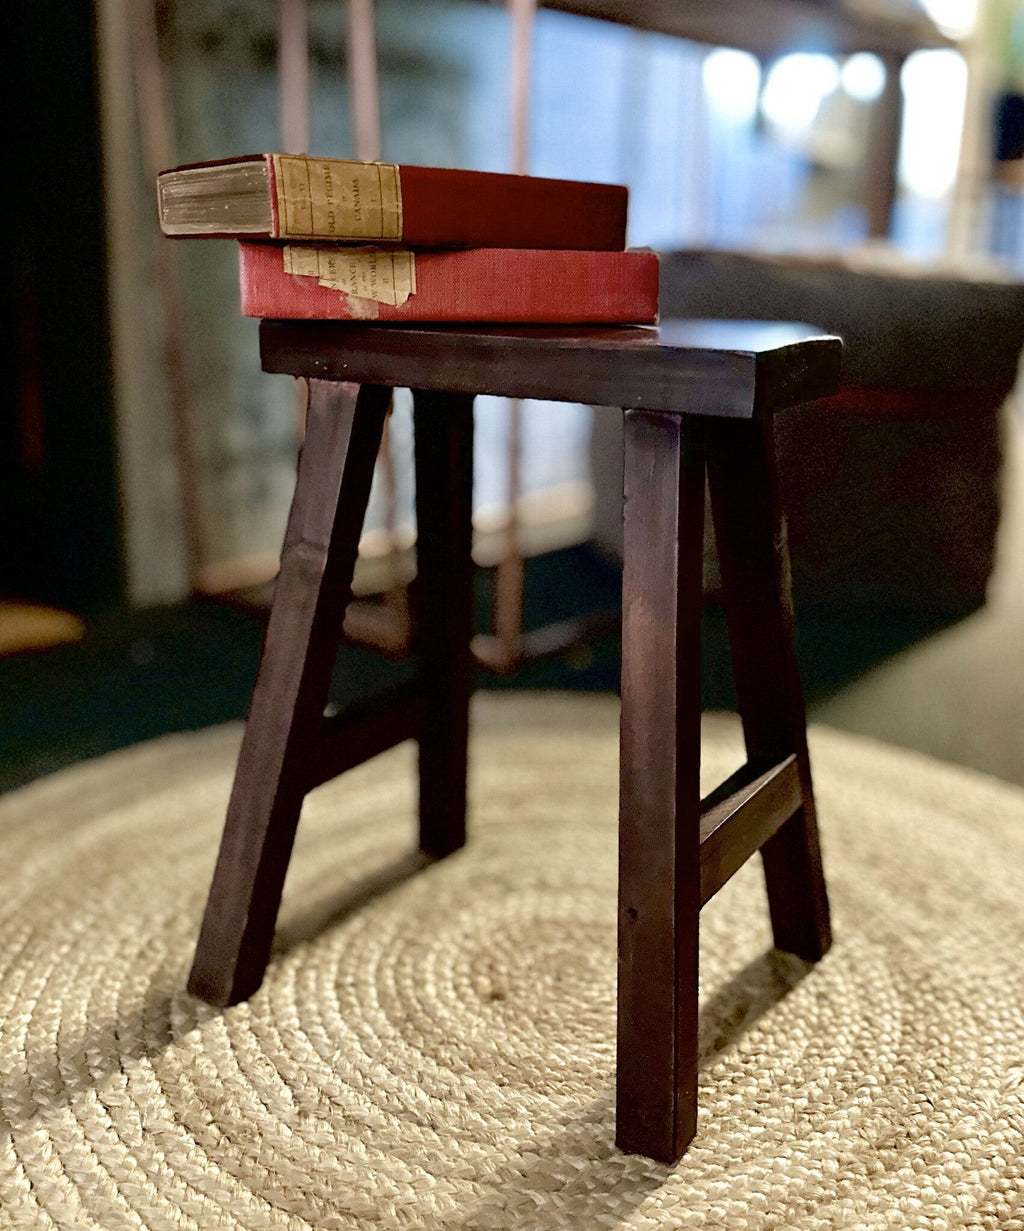 50% Off, Wooden Stool, Recycled Firwood - firstorganicbaby